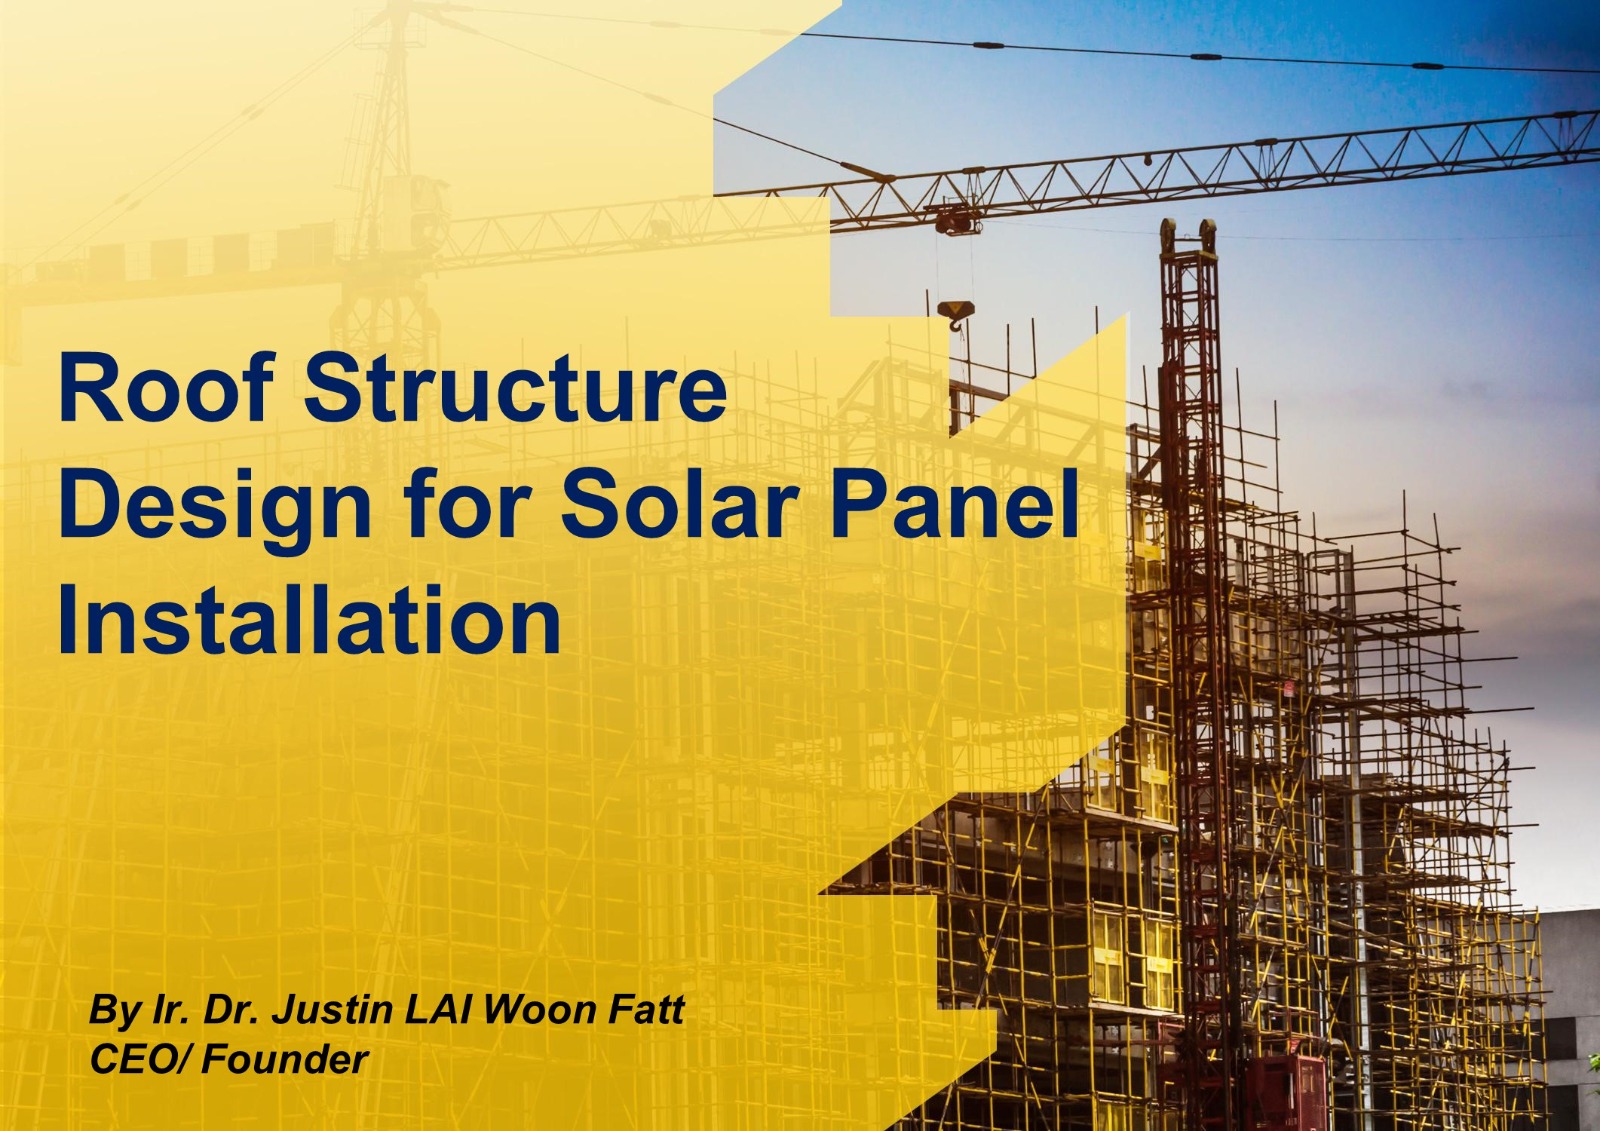 Roof Structure Design for Solar Panel Installation